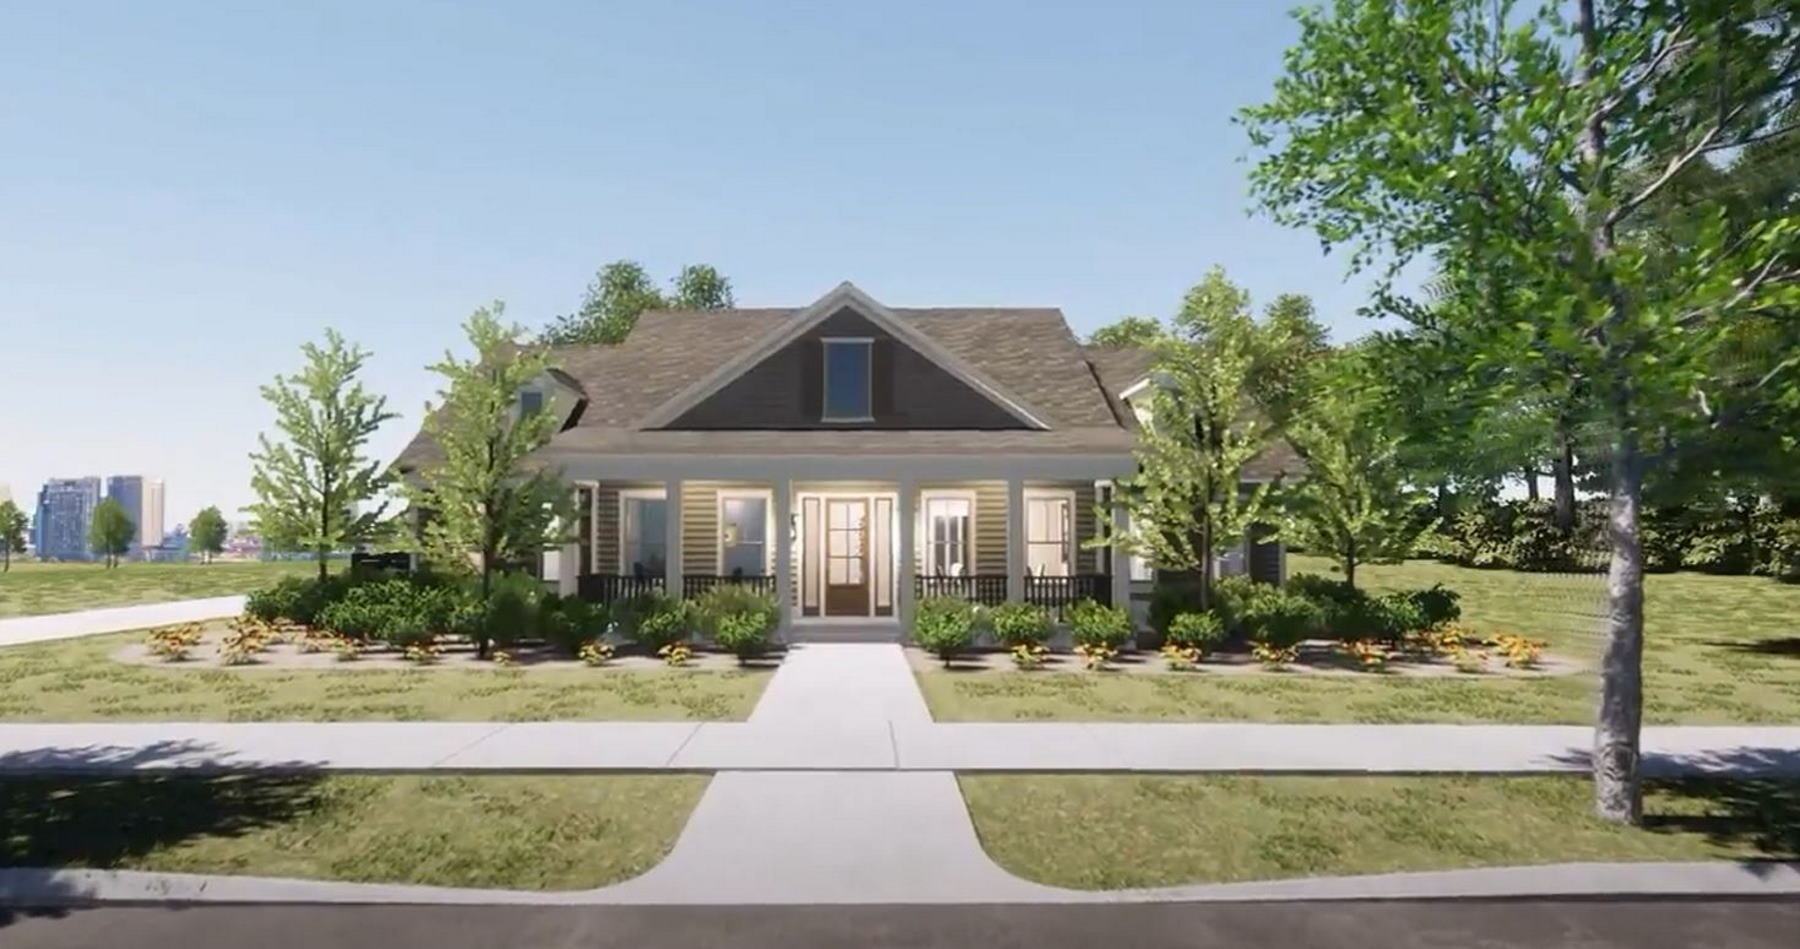 Residential design with front porch and Dutch gable roof